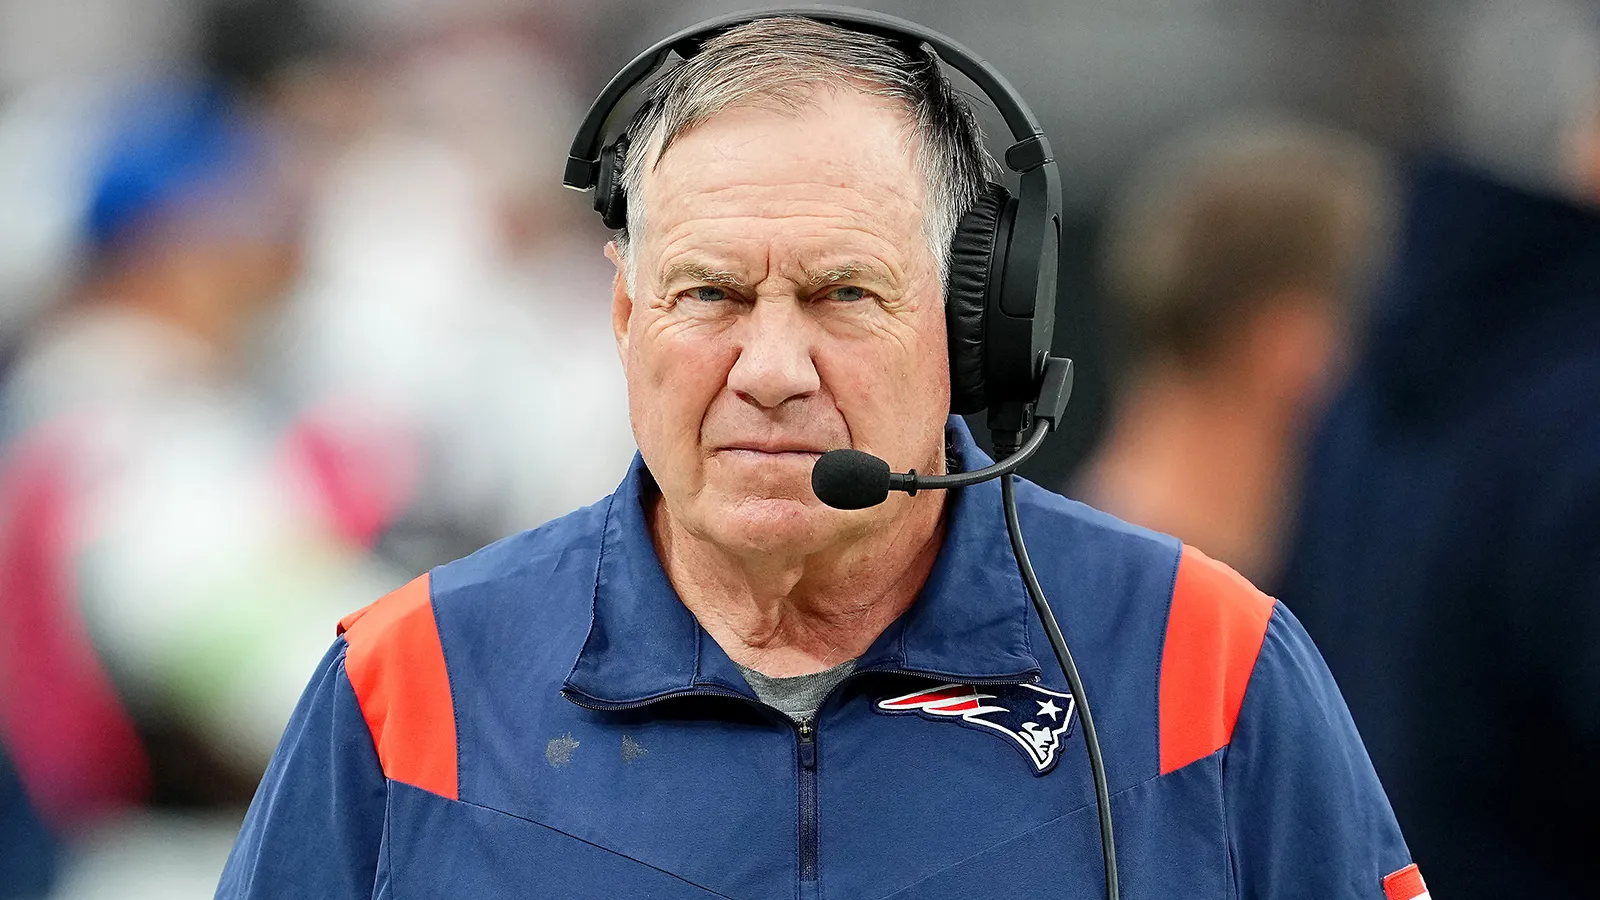  Bill Belichick's Next Move Eyeing Coaching Opportunities with NFC East Giants